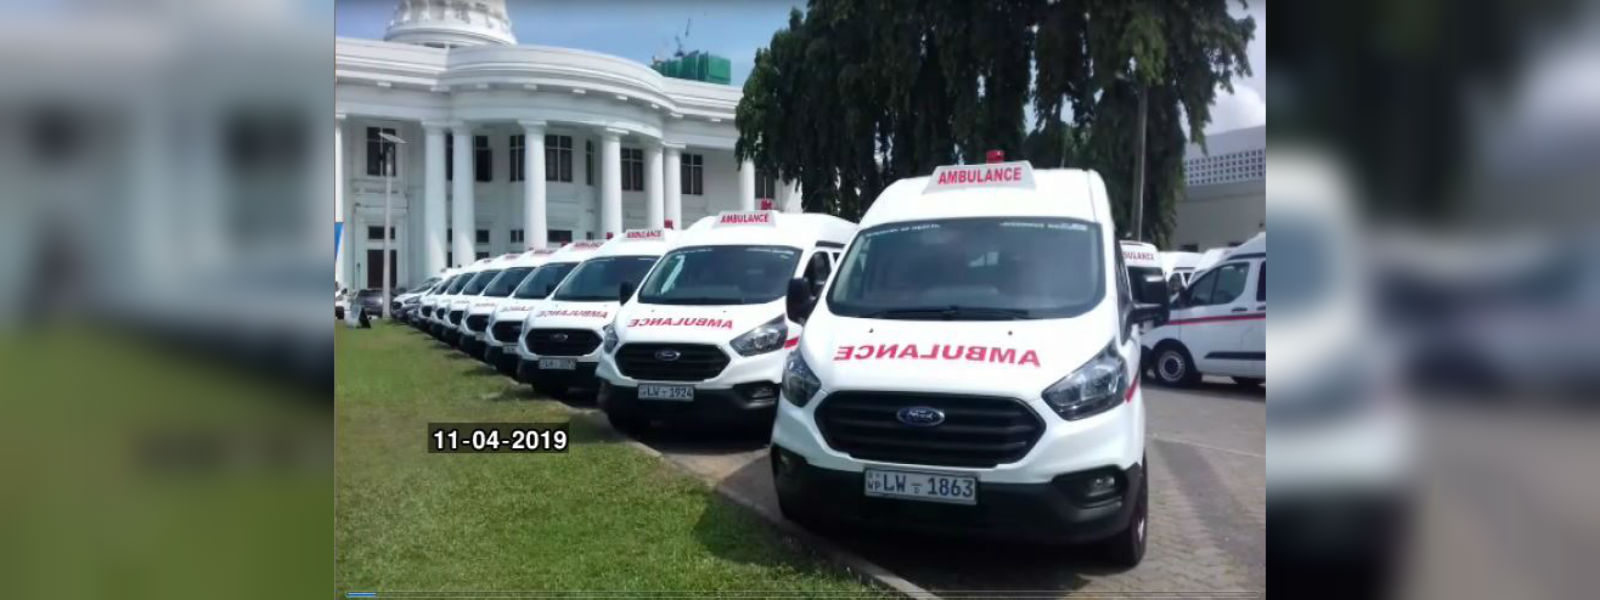 138 ambulances donated across the country